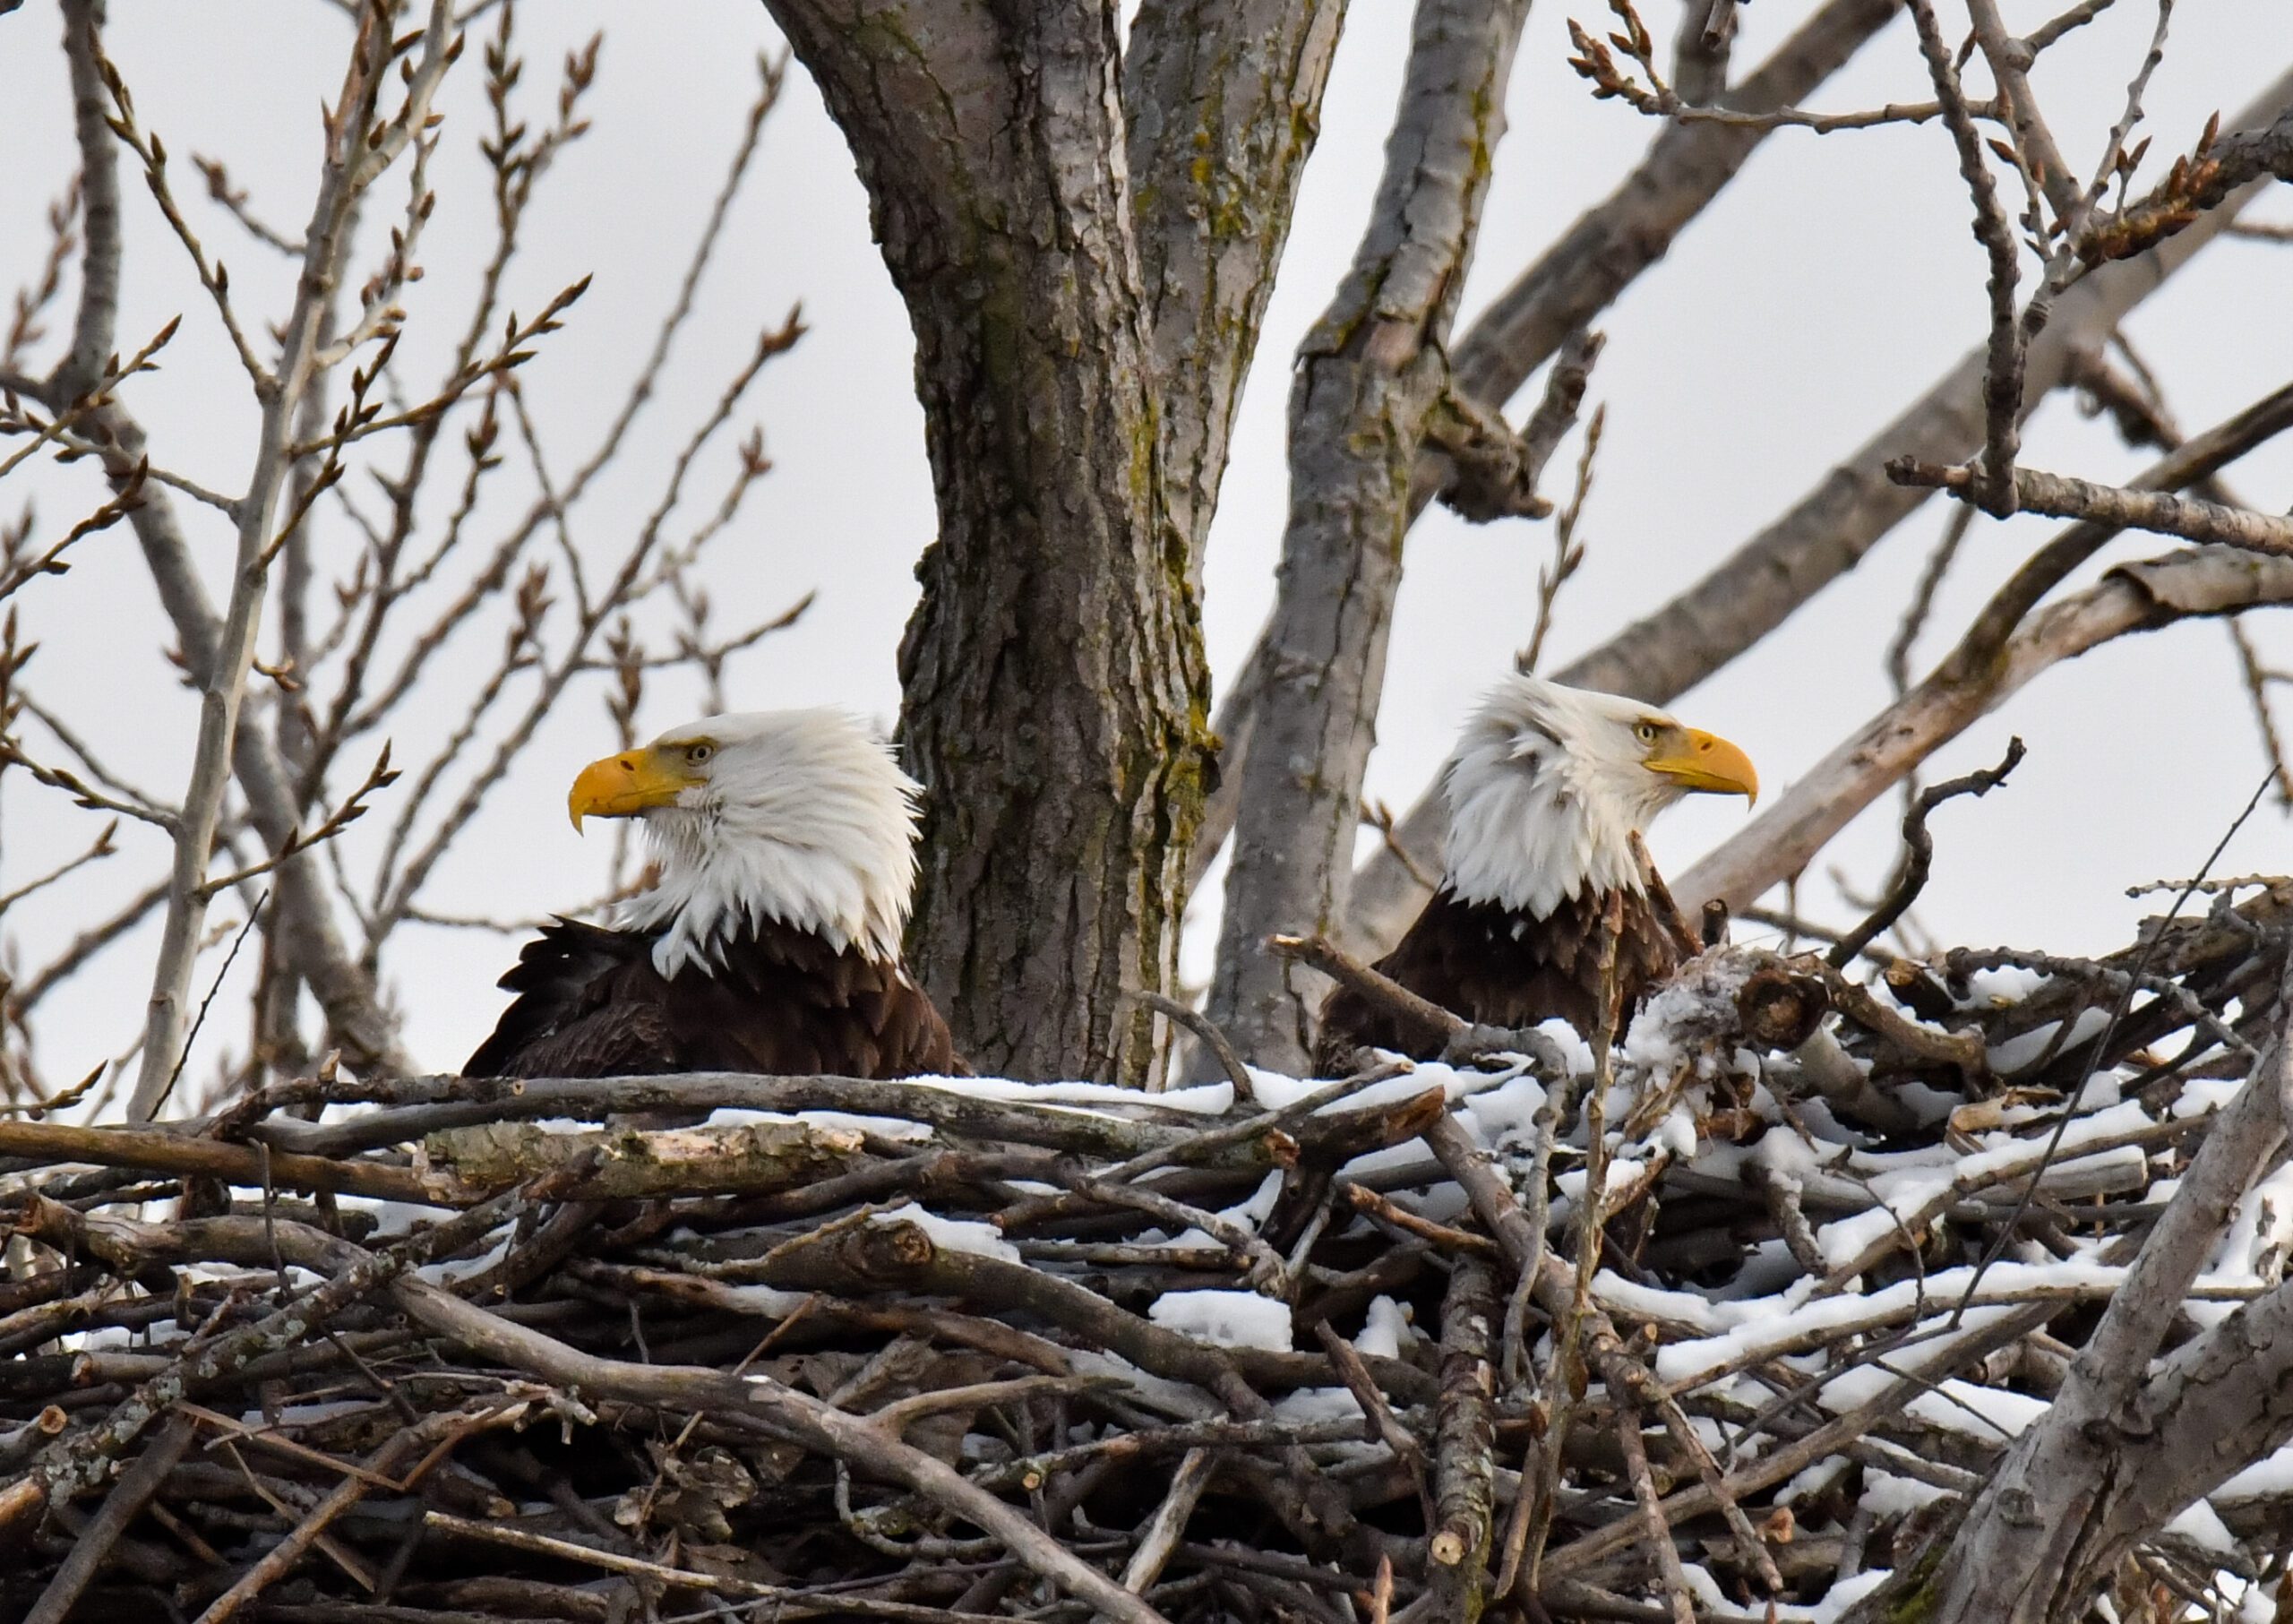 A pair of bald eagles in a nest